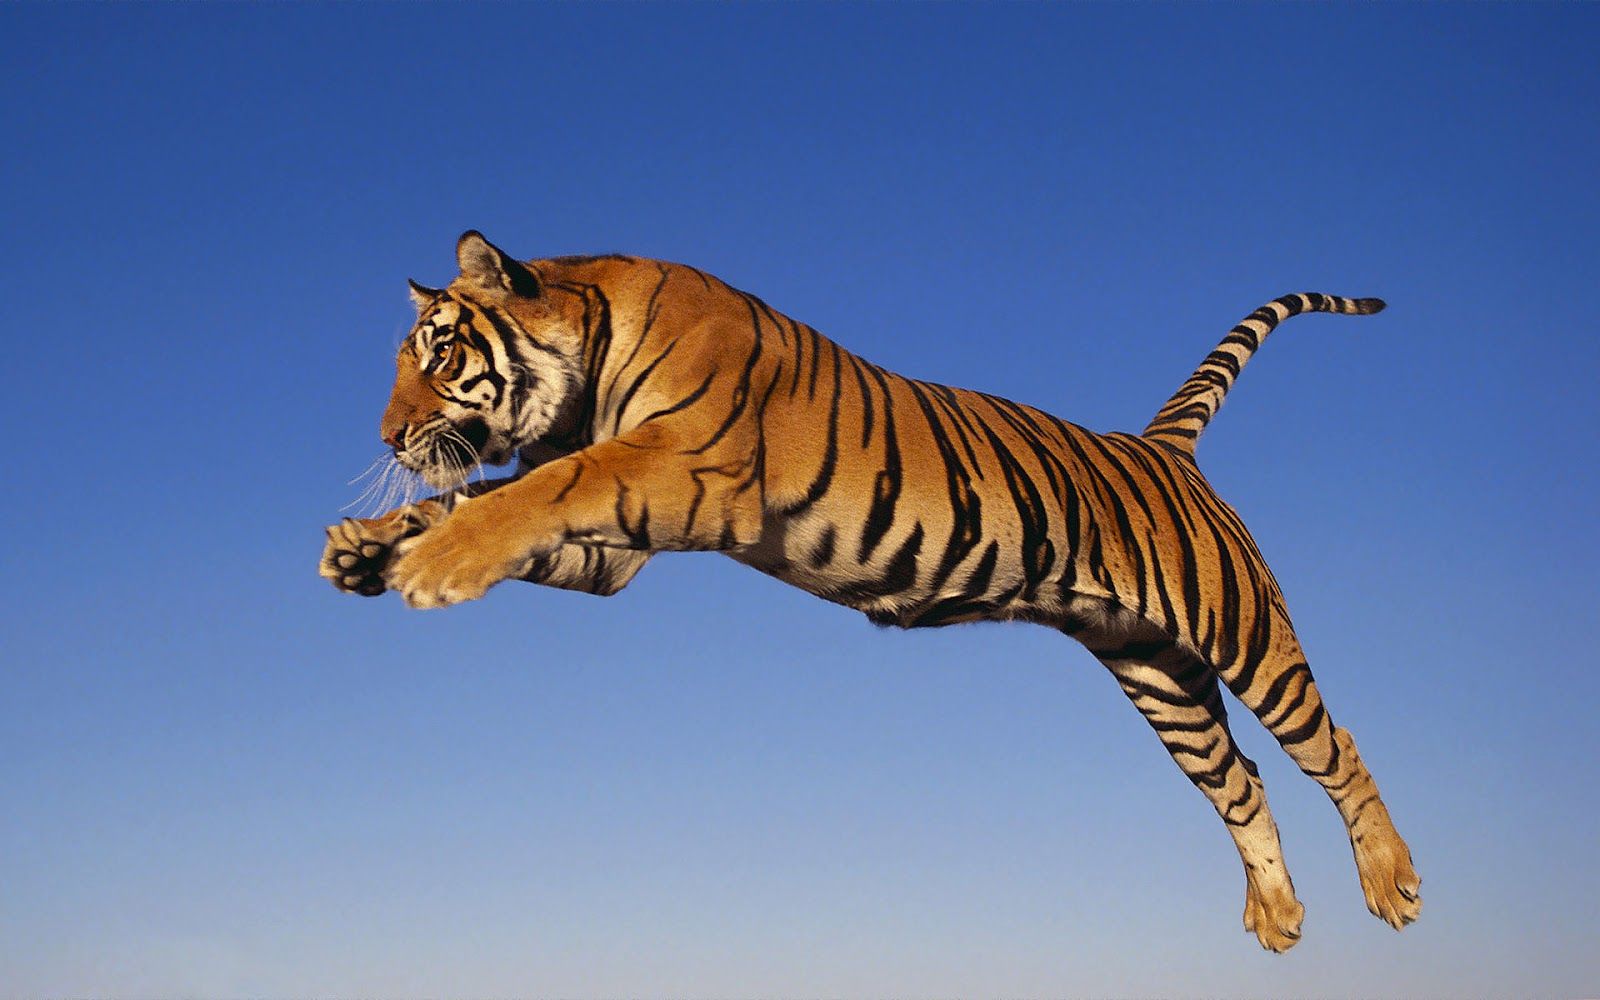 HD Tiger Image Wallpaper And Pictures Beautiful Animals